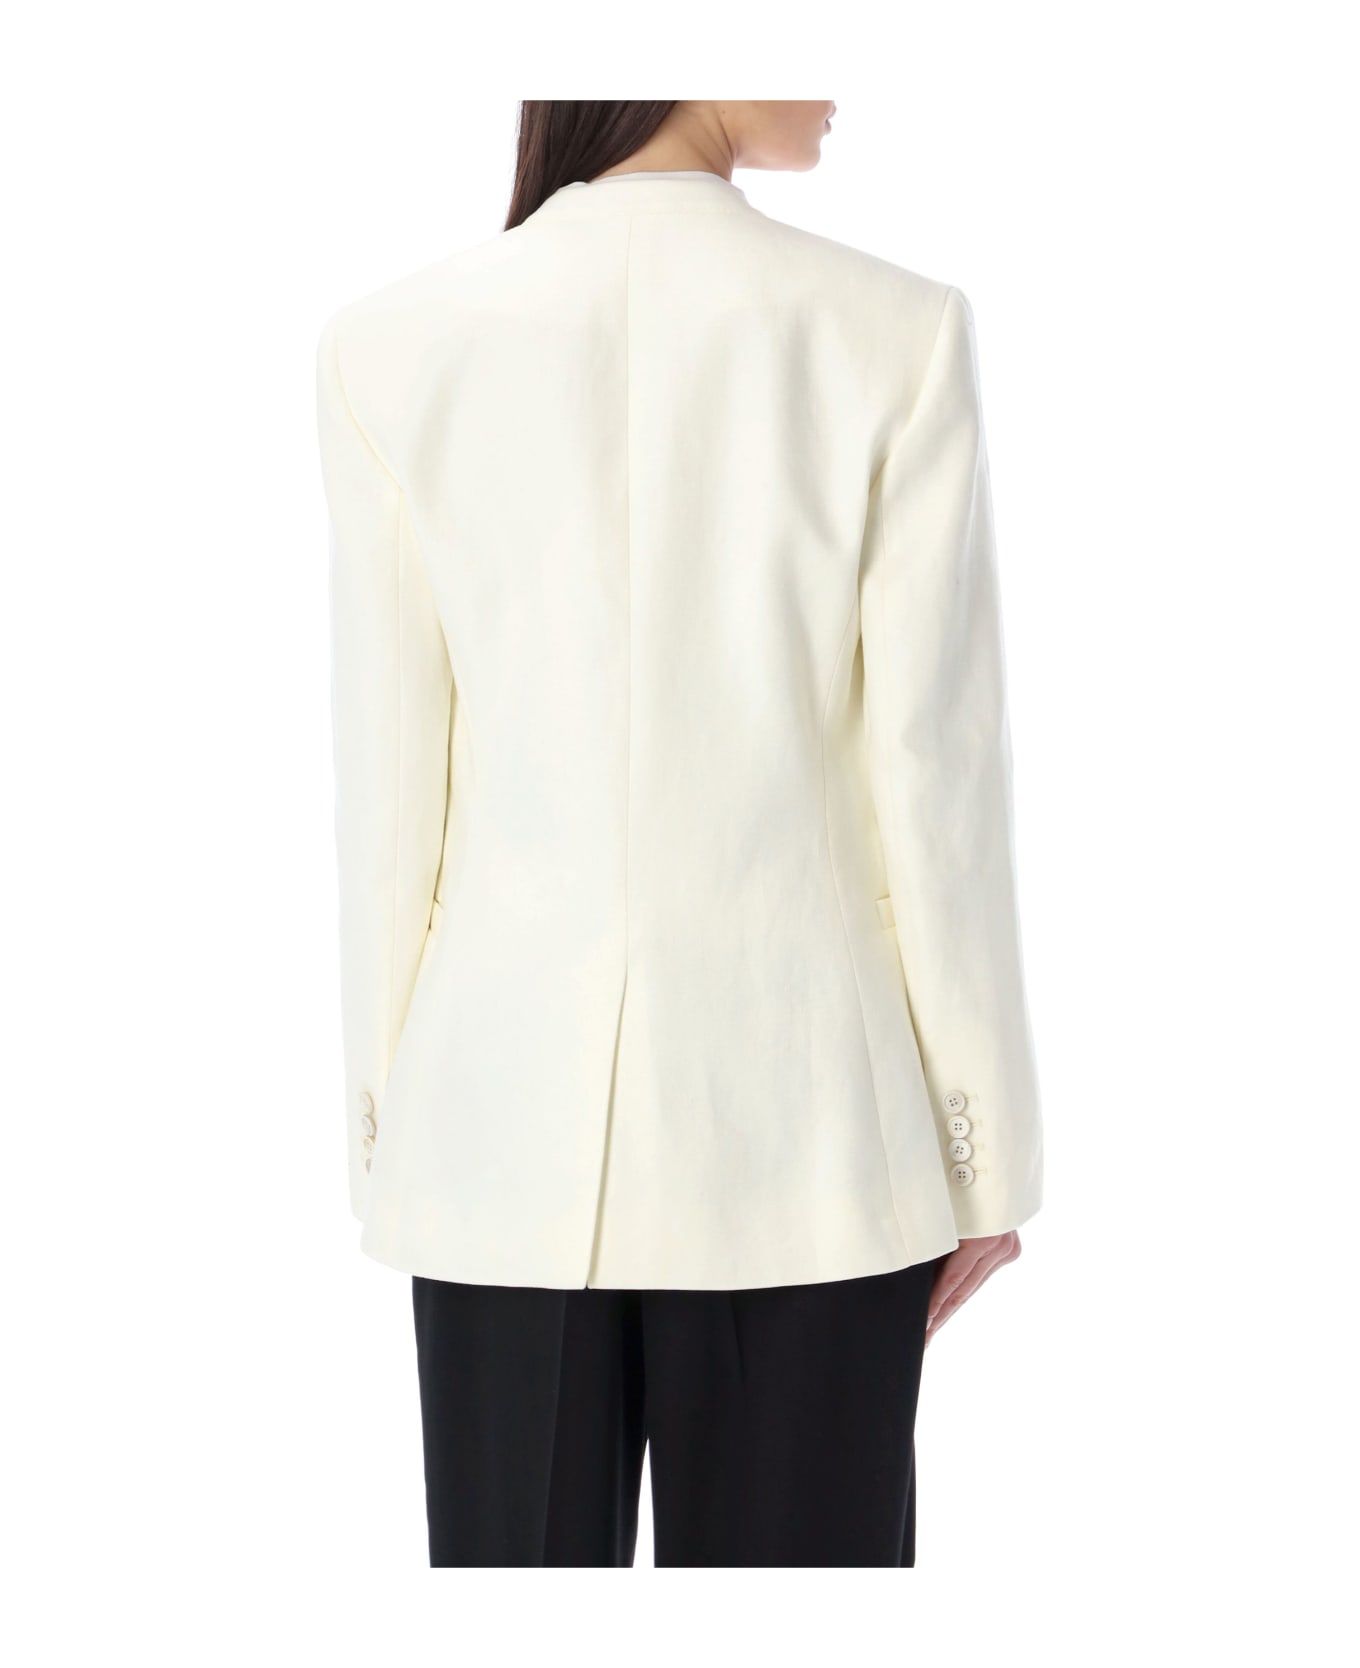 Chloé Buttonless Tailored Jacket - ICONIC MILK